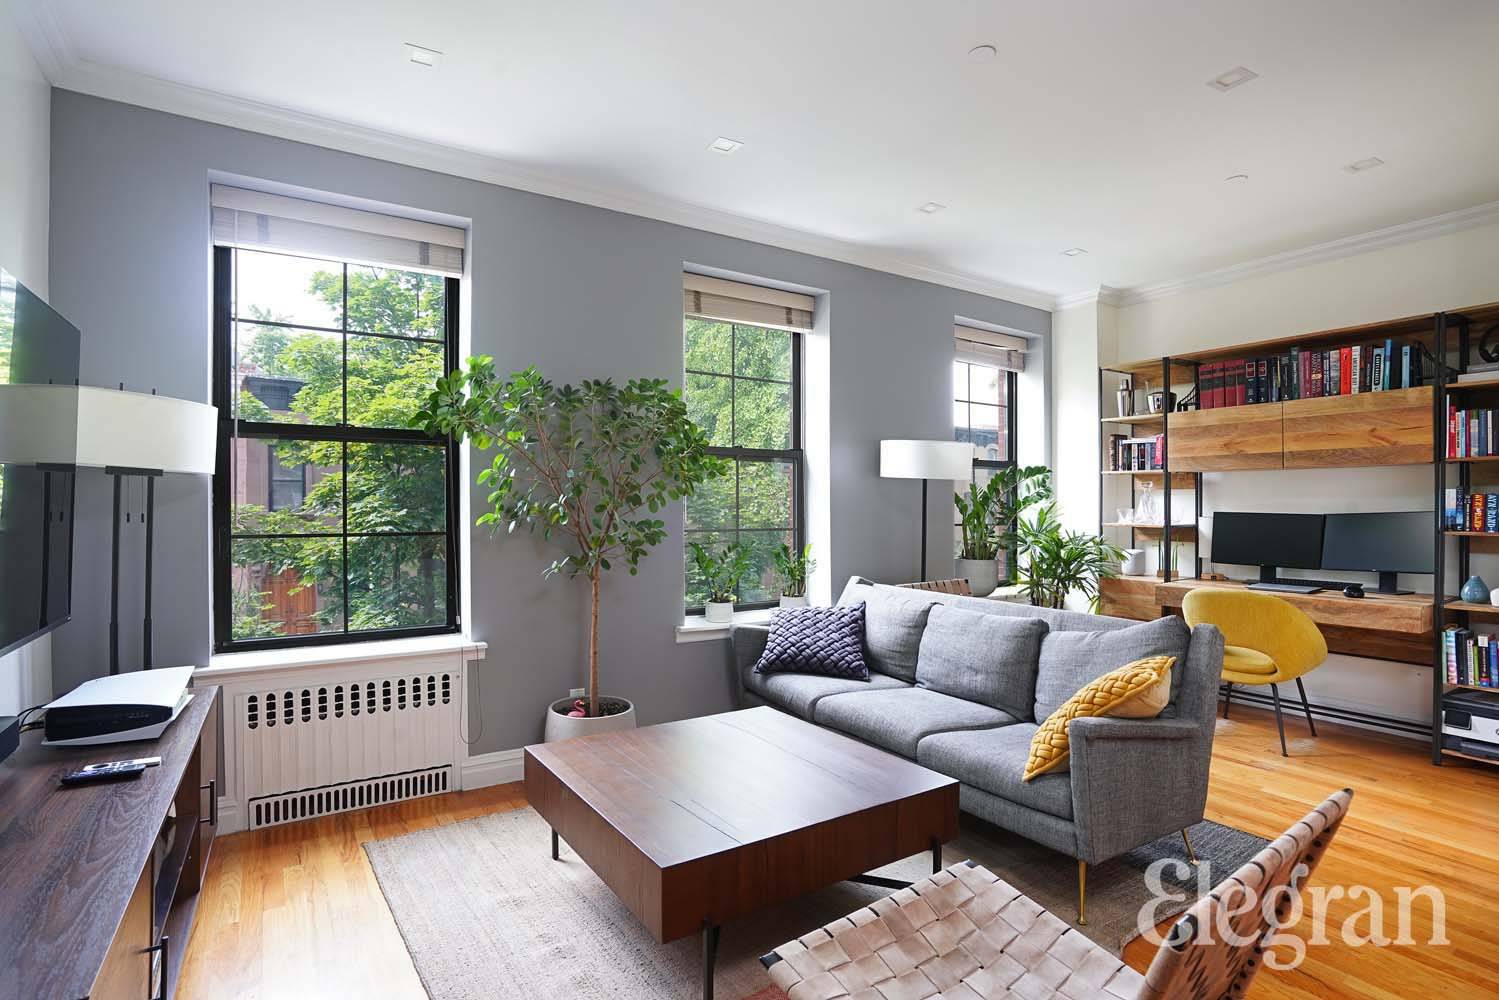 Set within the heart of North Park Slope is this beautiful home.